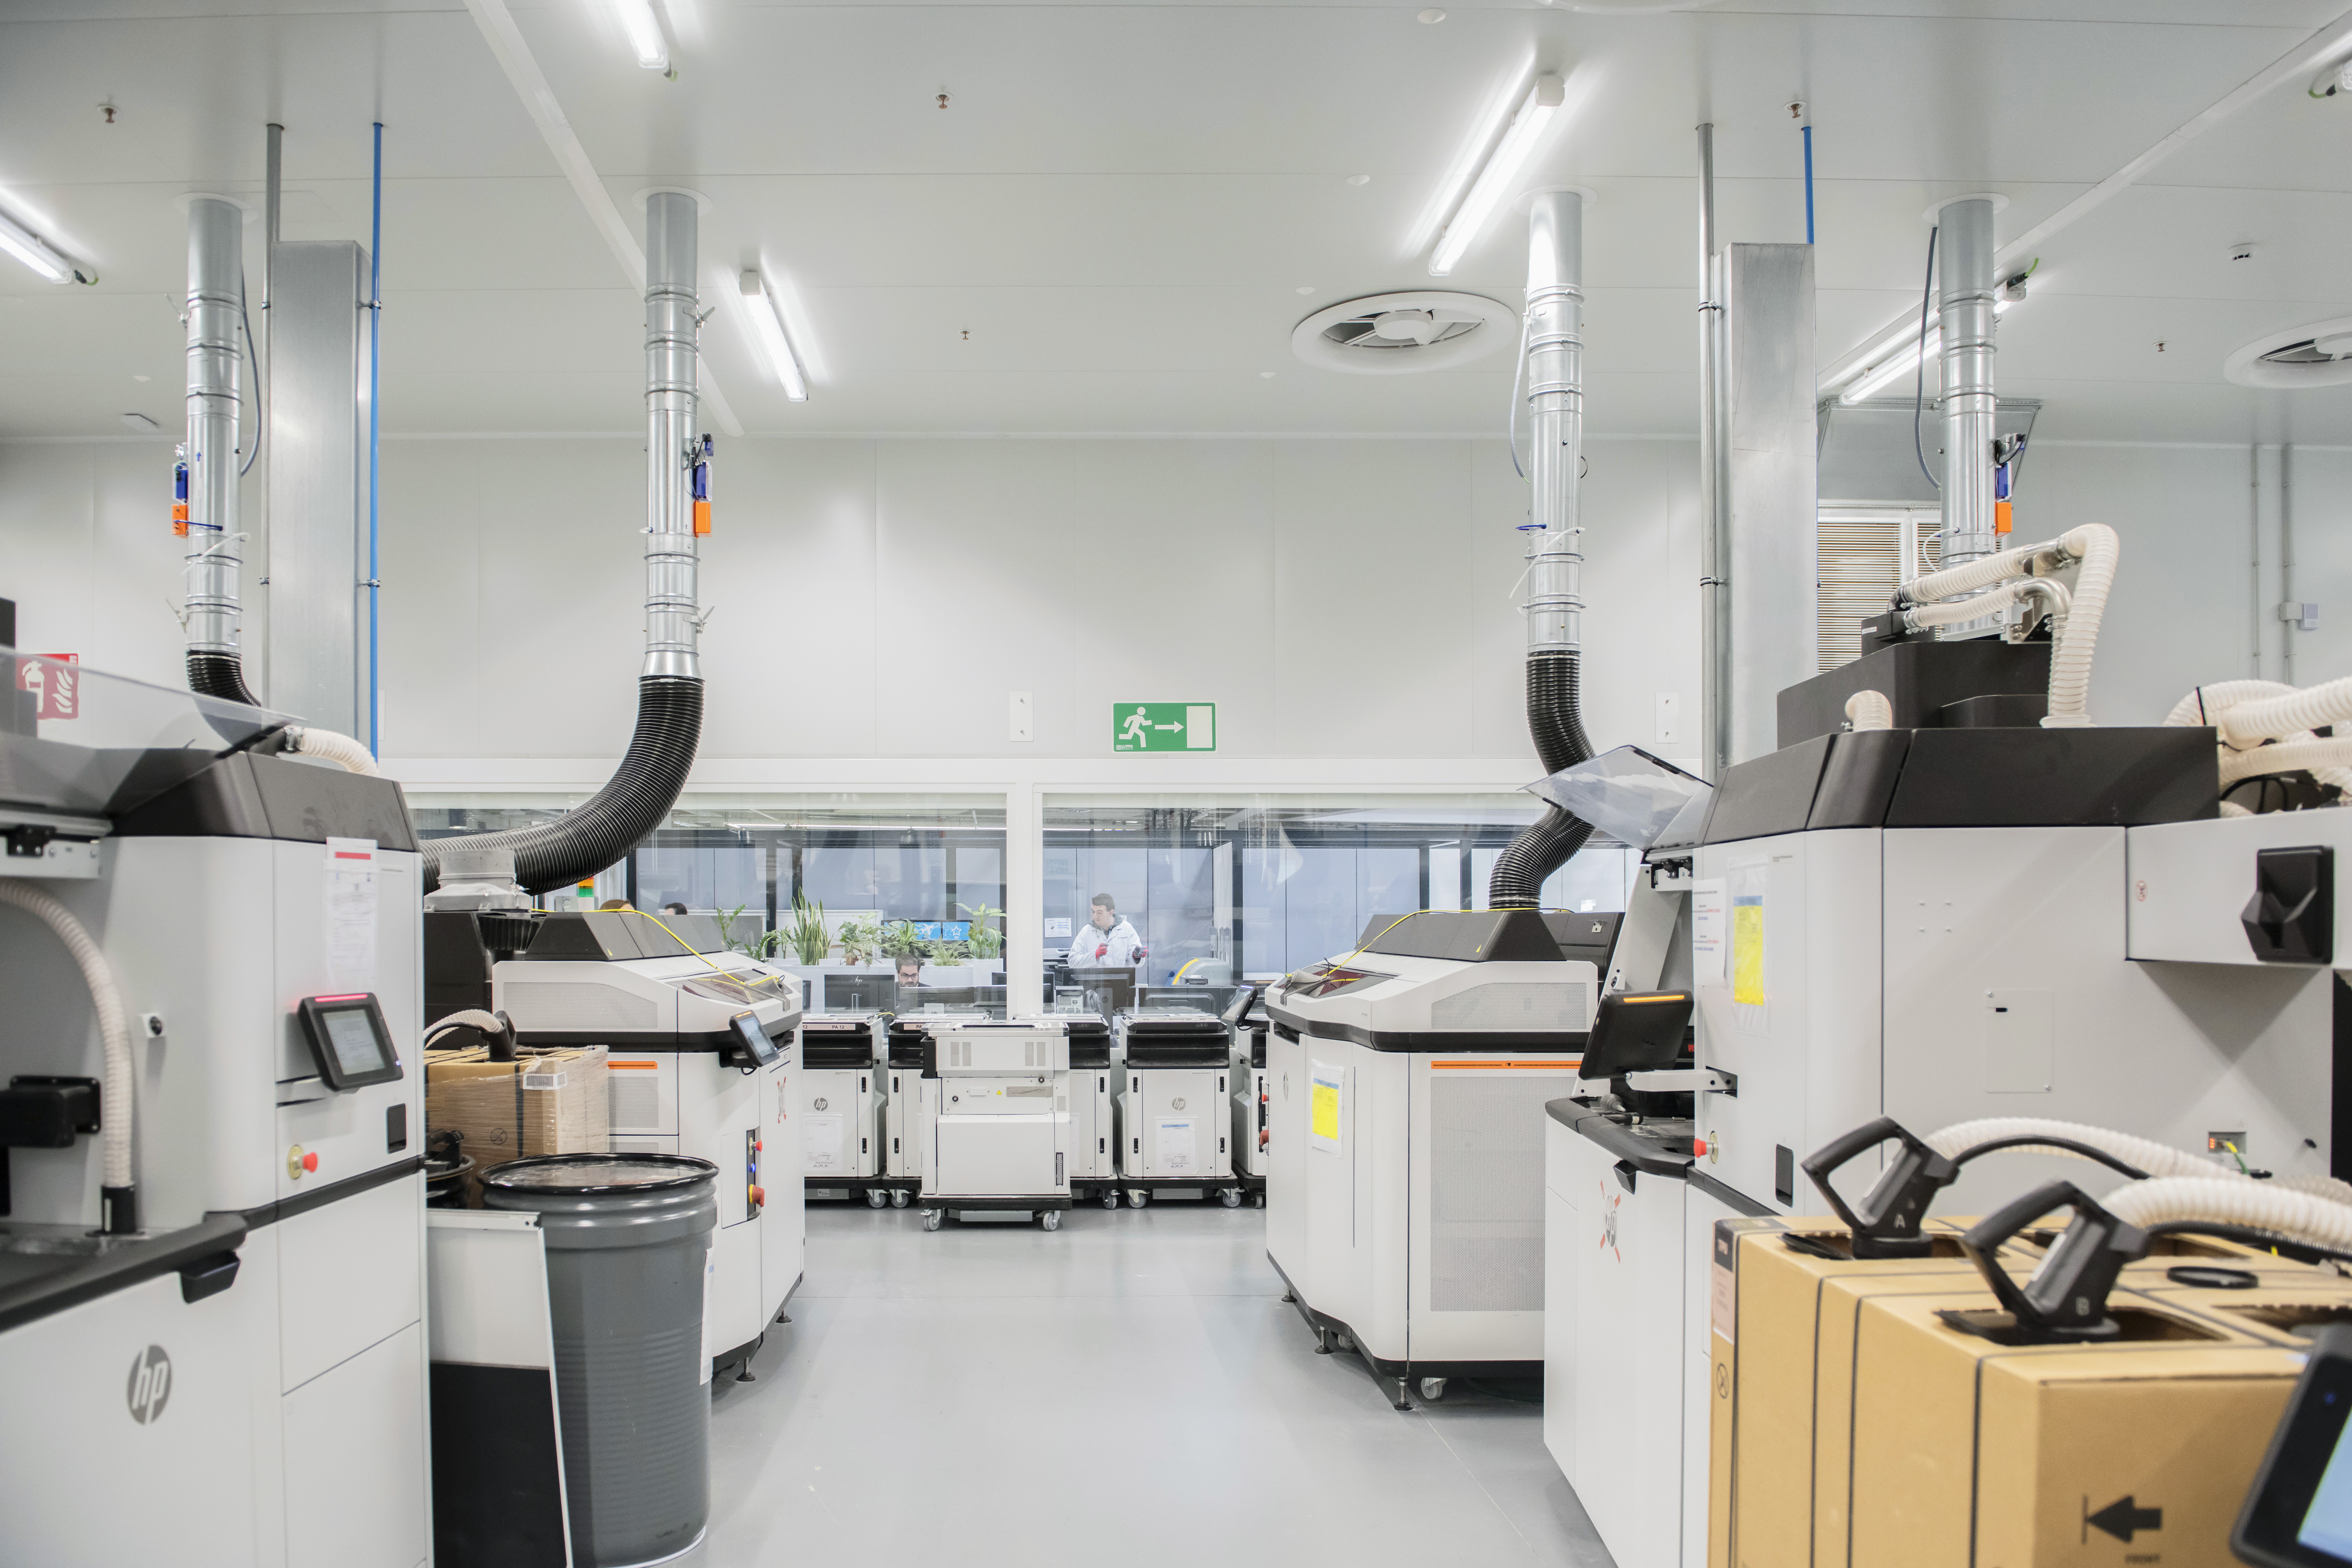 Inside the production lab at HP's new 3 arce 3D Printing and Digital Manufacturing Center of Excellence. Photo via Vicens Gimenez/HP.